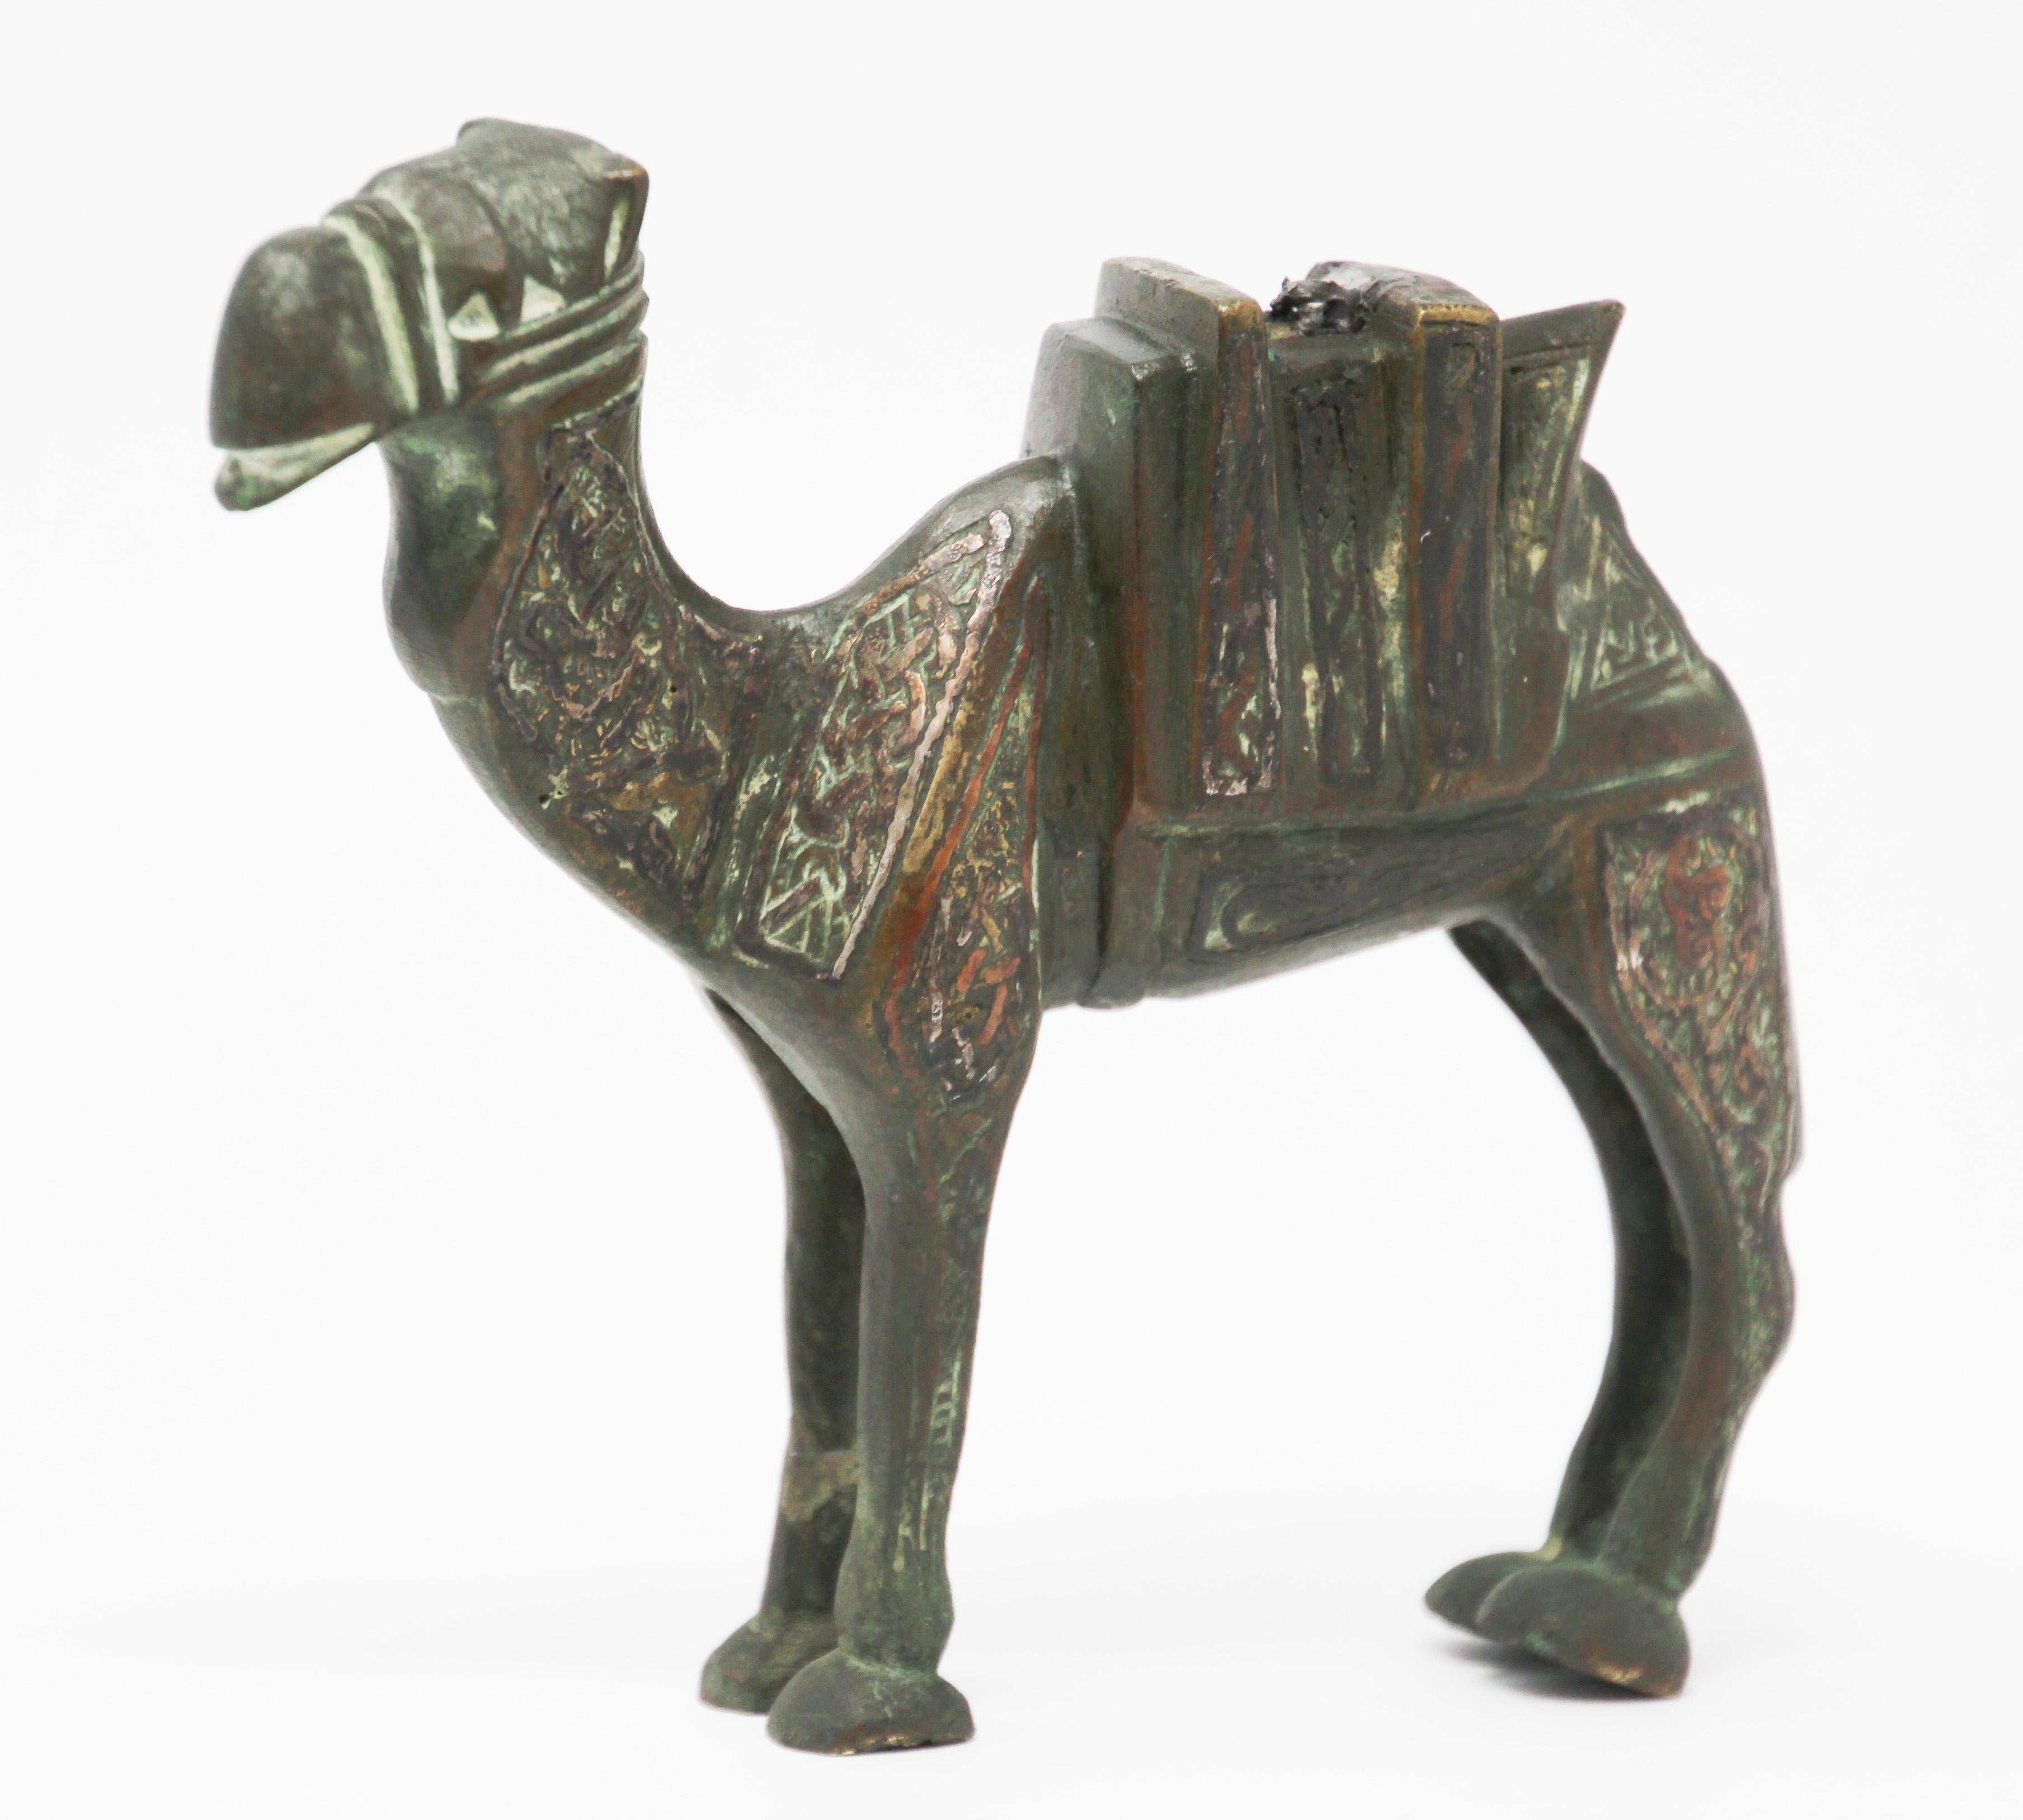 This is an antique metal cast brass overlaid with copper decoration sculpture of a camel, circa 1920.
Brass handcrafted sculpture in Mameluke revival style, Islamic inlay metal artwork.
Very decorative unusual overlaid with copper, silver and black